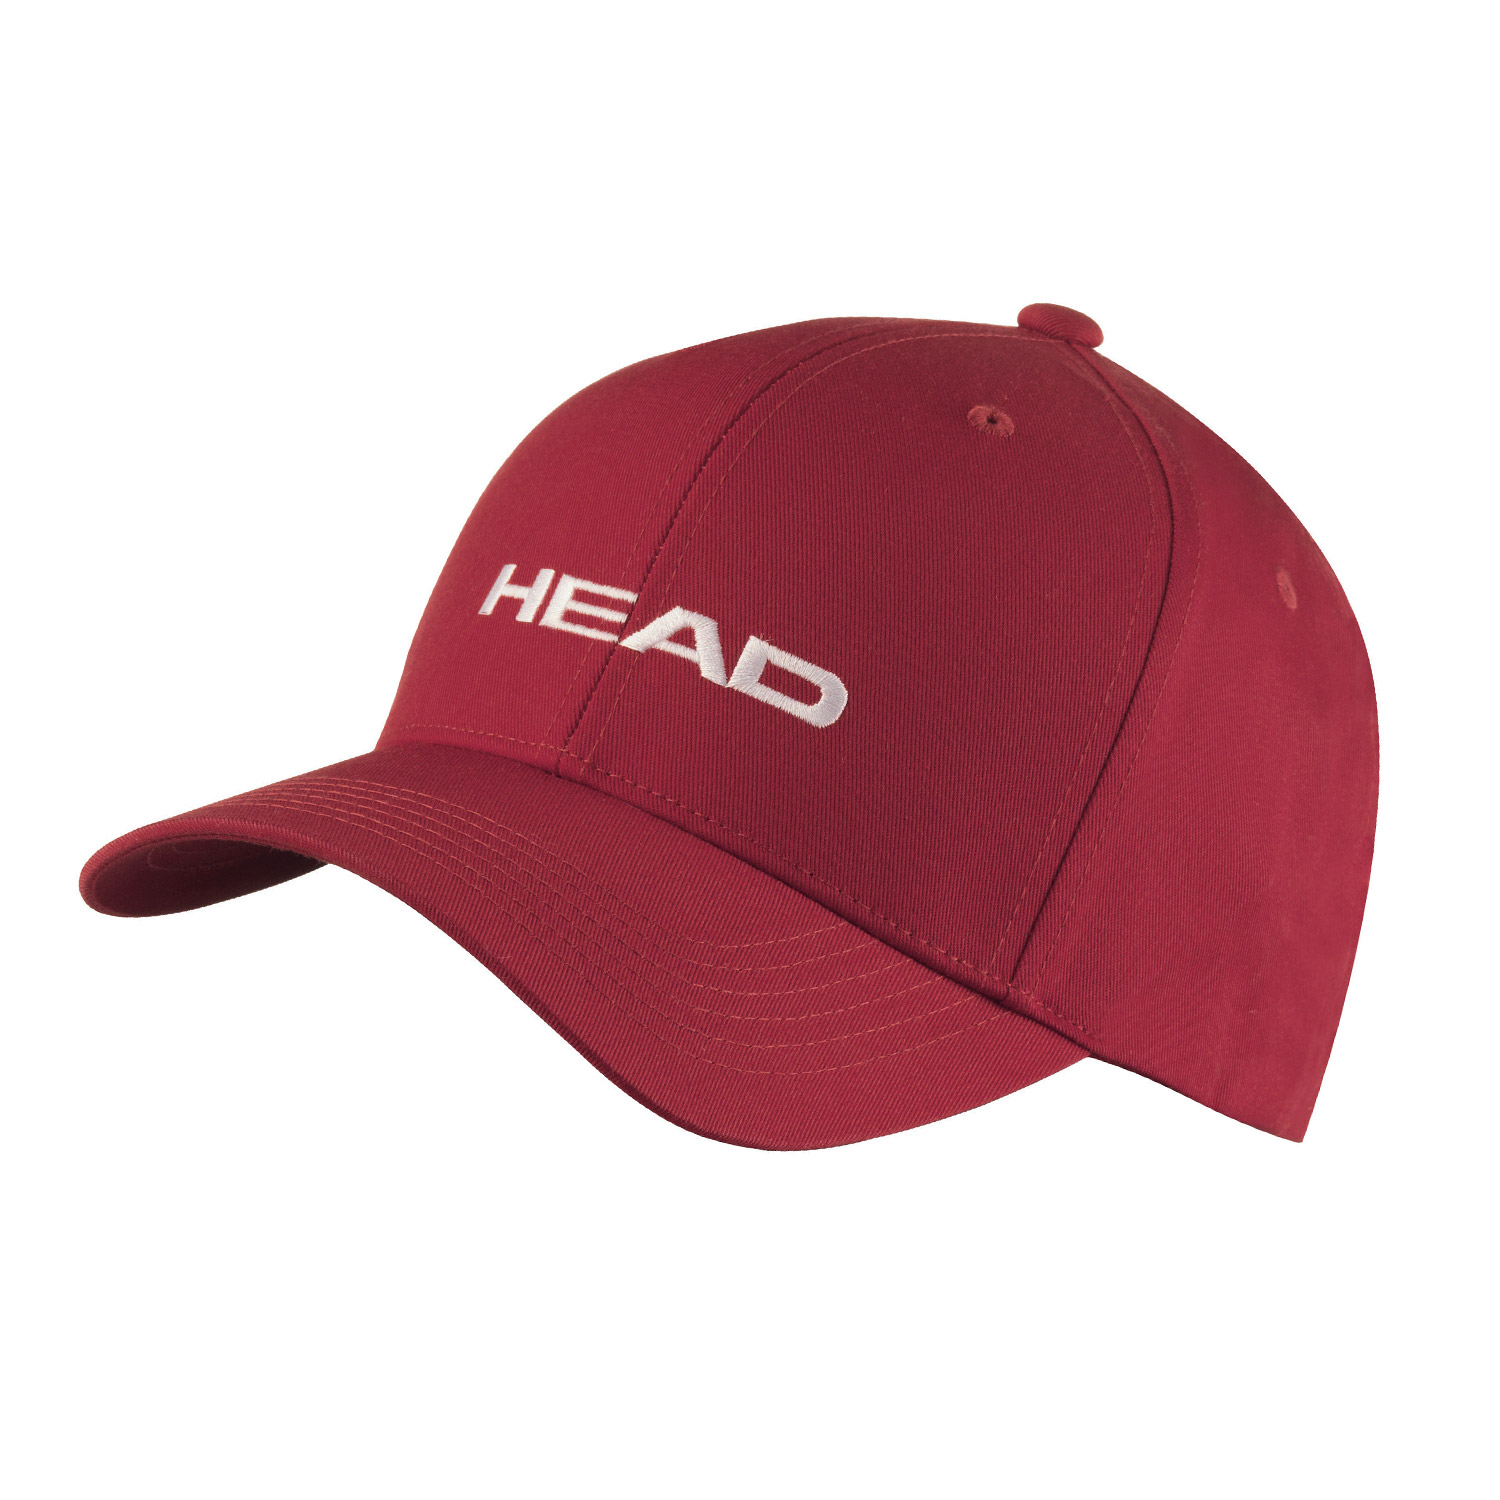 Head Promotion Gorra - Red